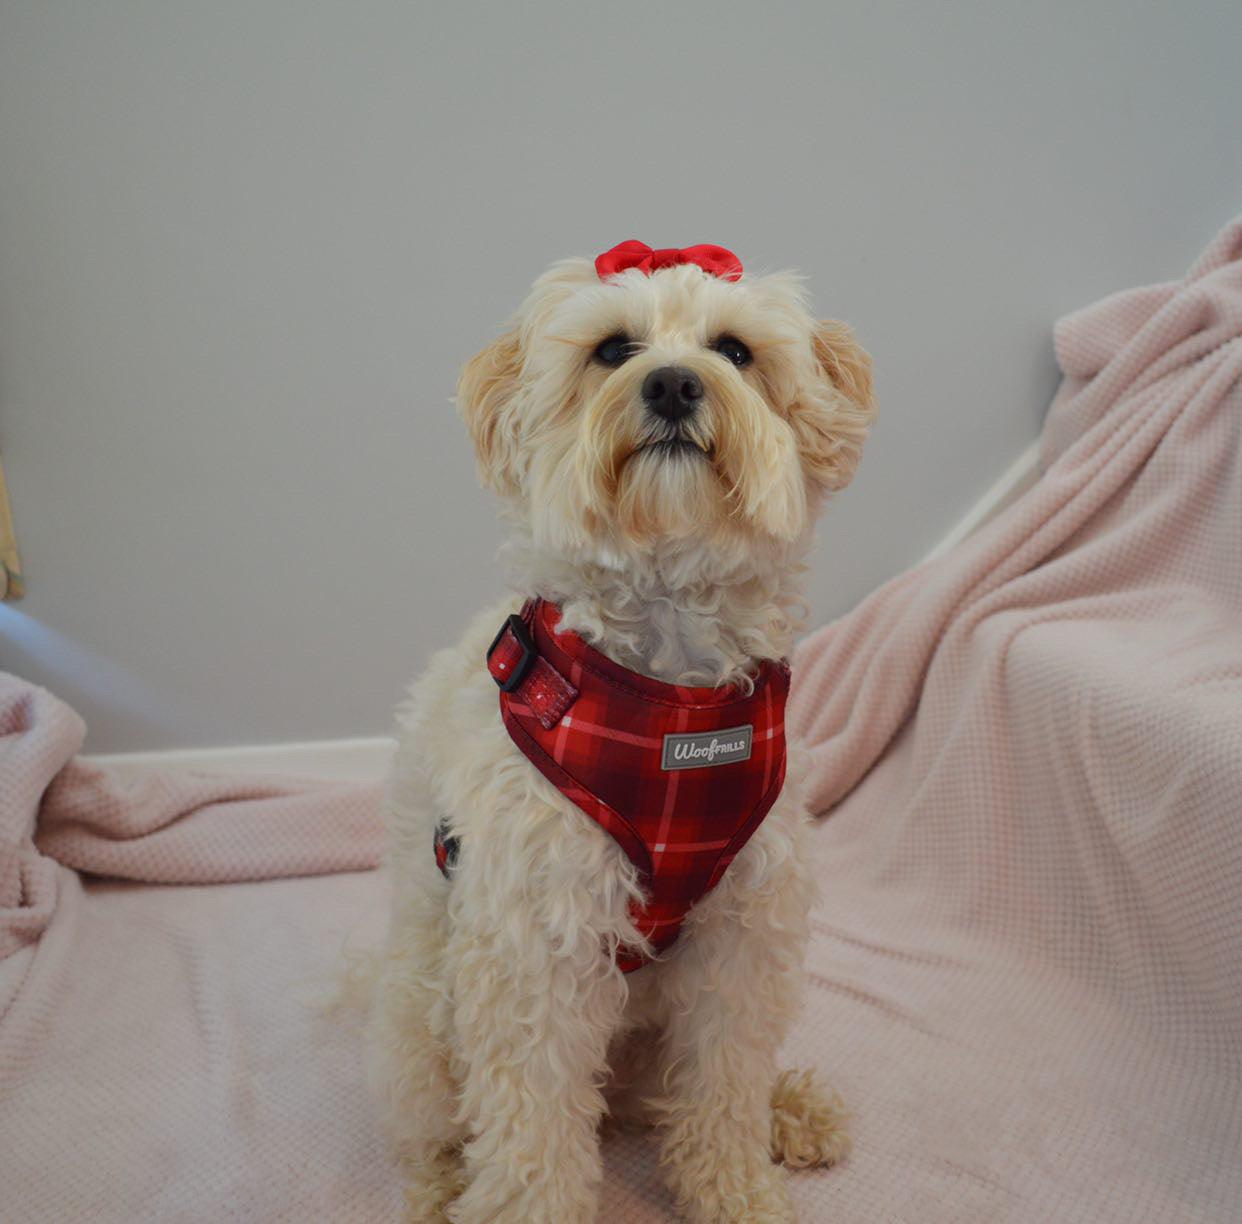 Maltese wearing a small dog harness